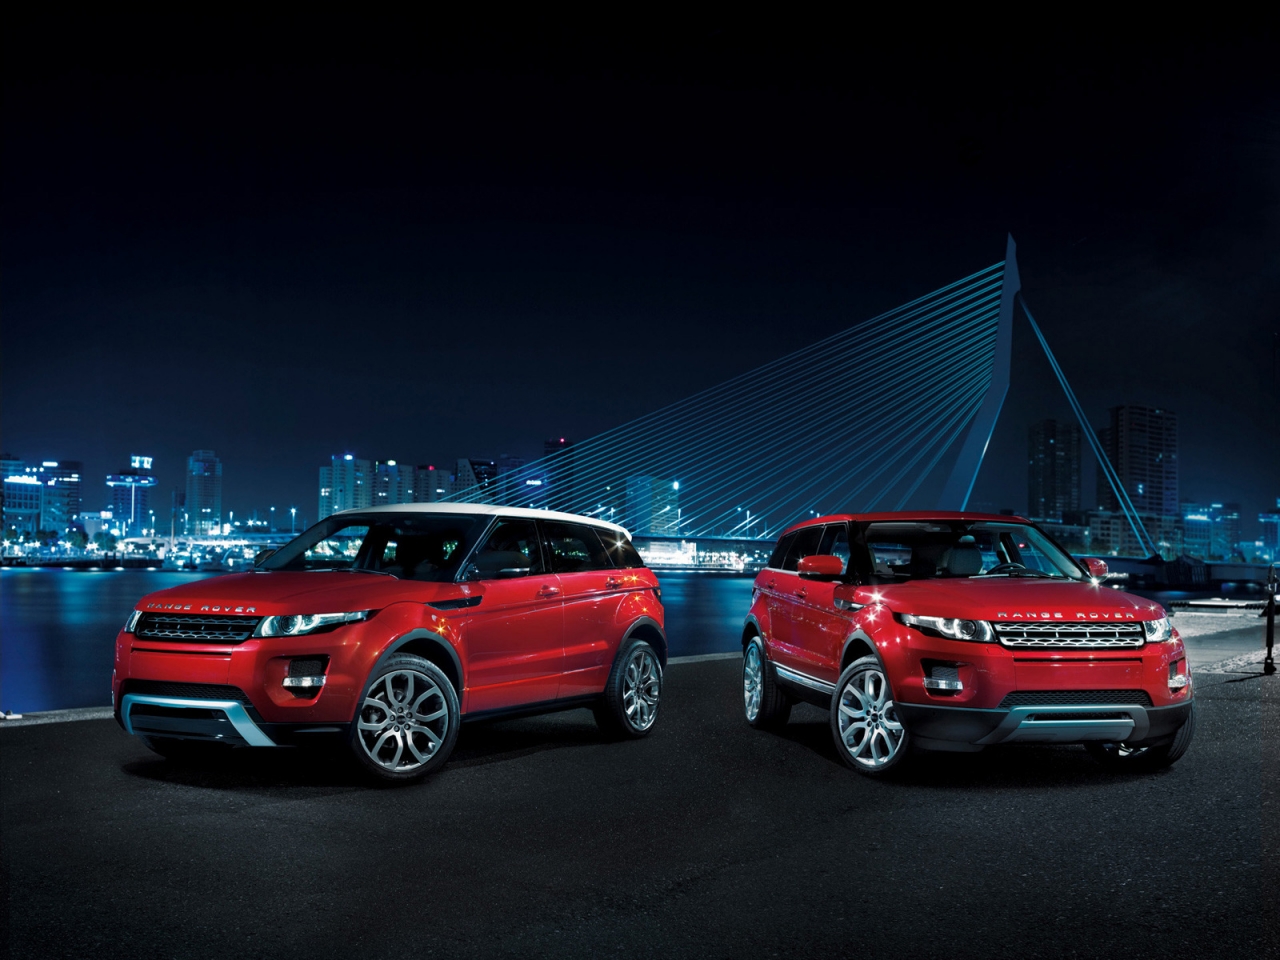 Range Rover Evoque Duo for 1280 x 960 resolution